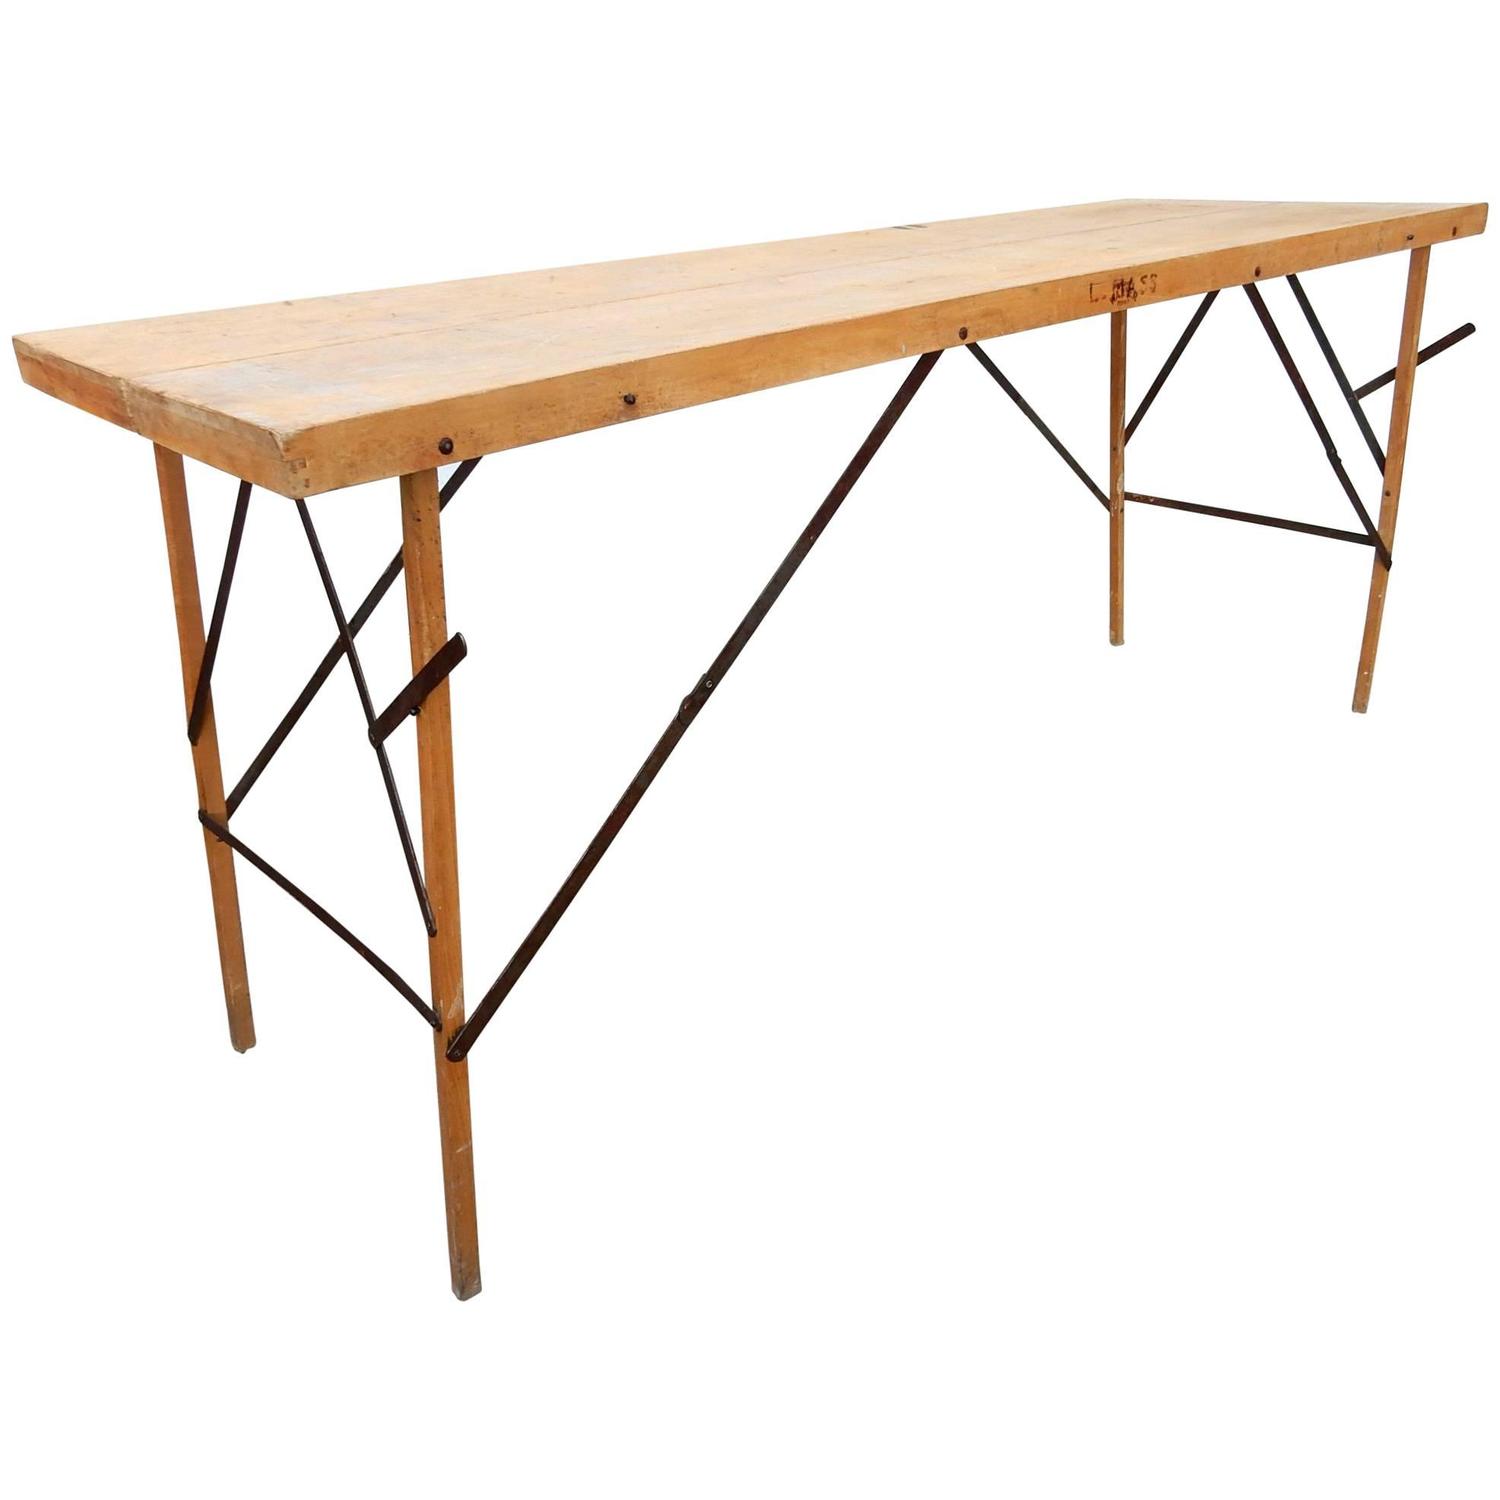 1930s Industrial Wallpaper Hangers Folding Table Or Desk For Sale At